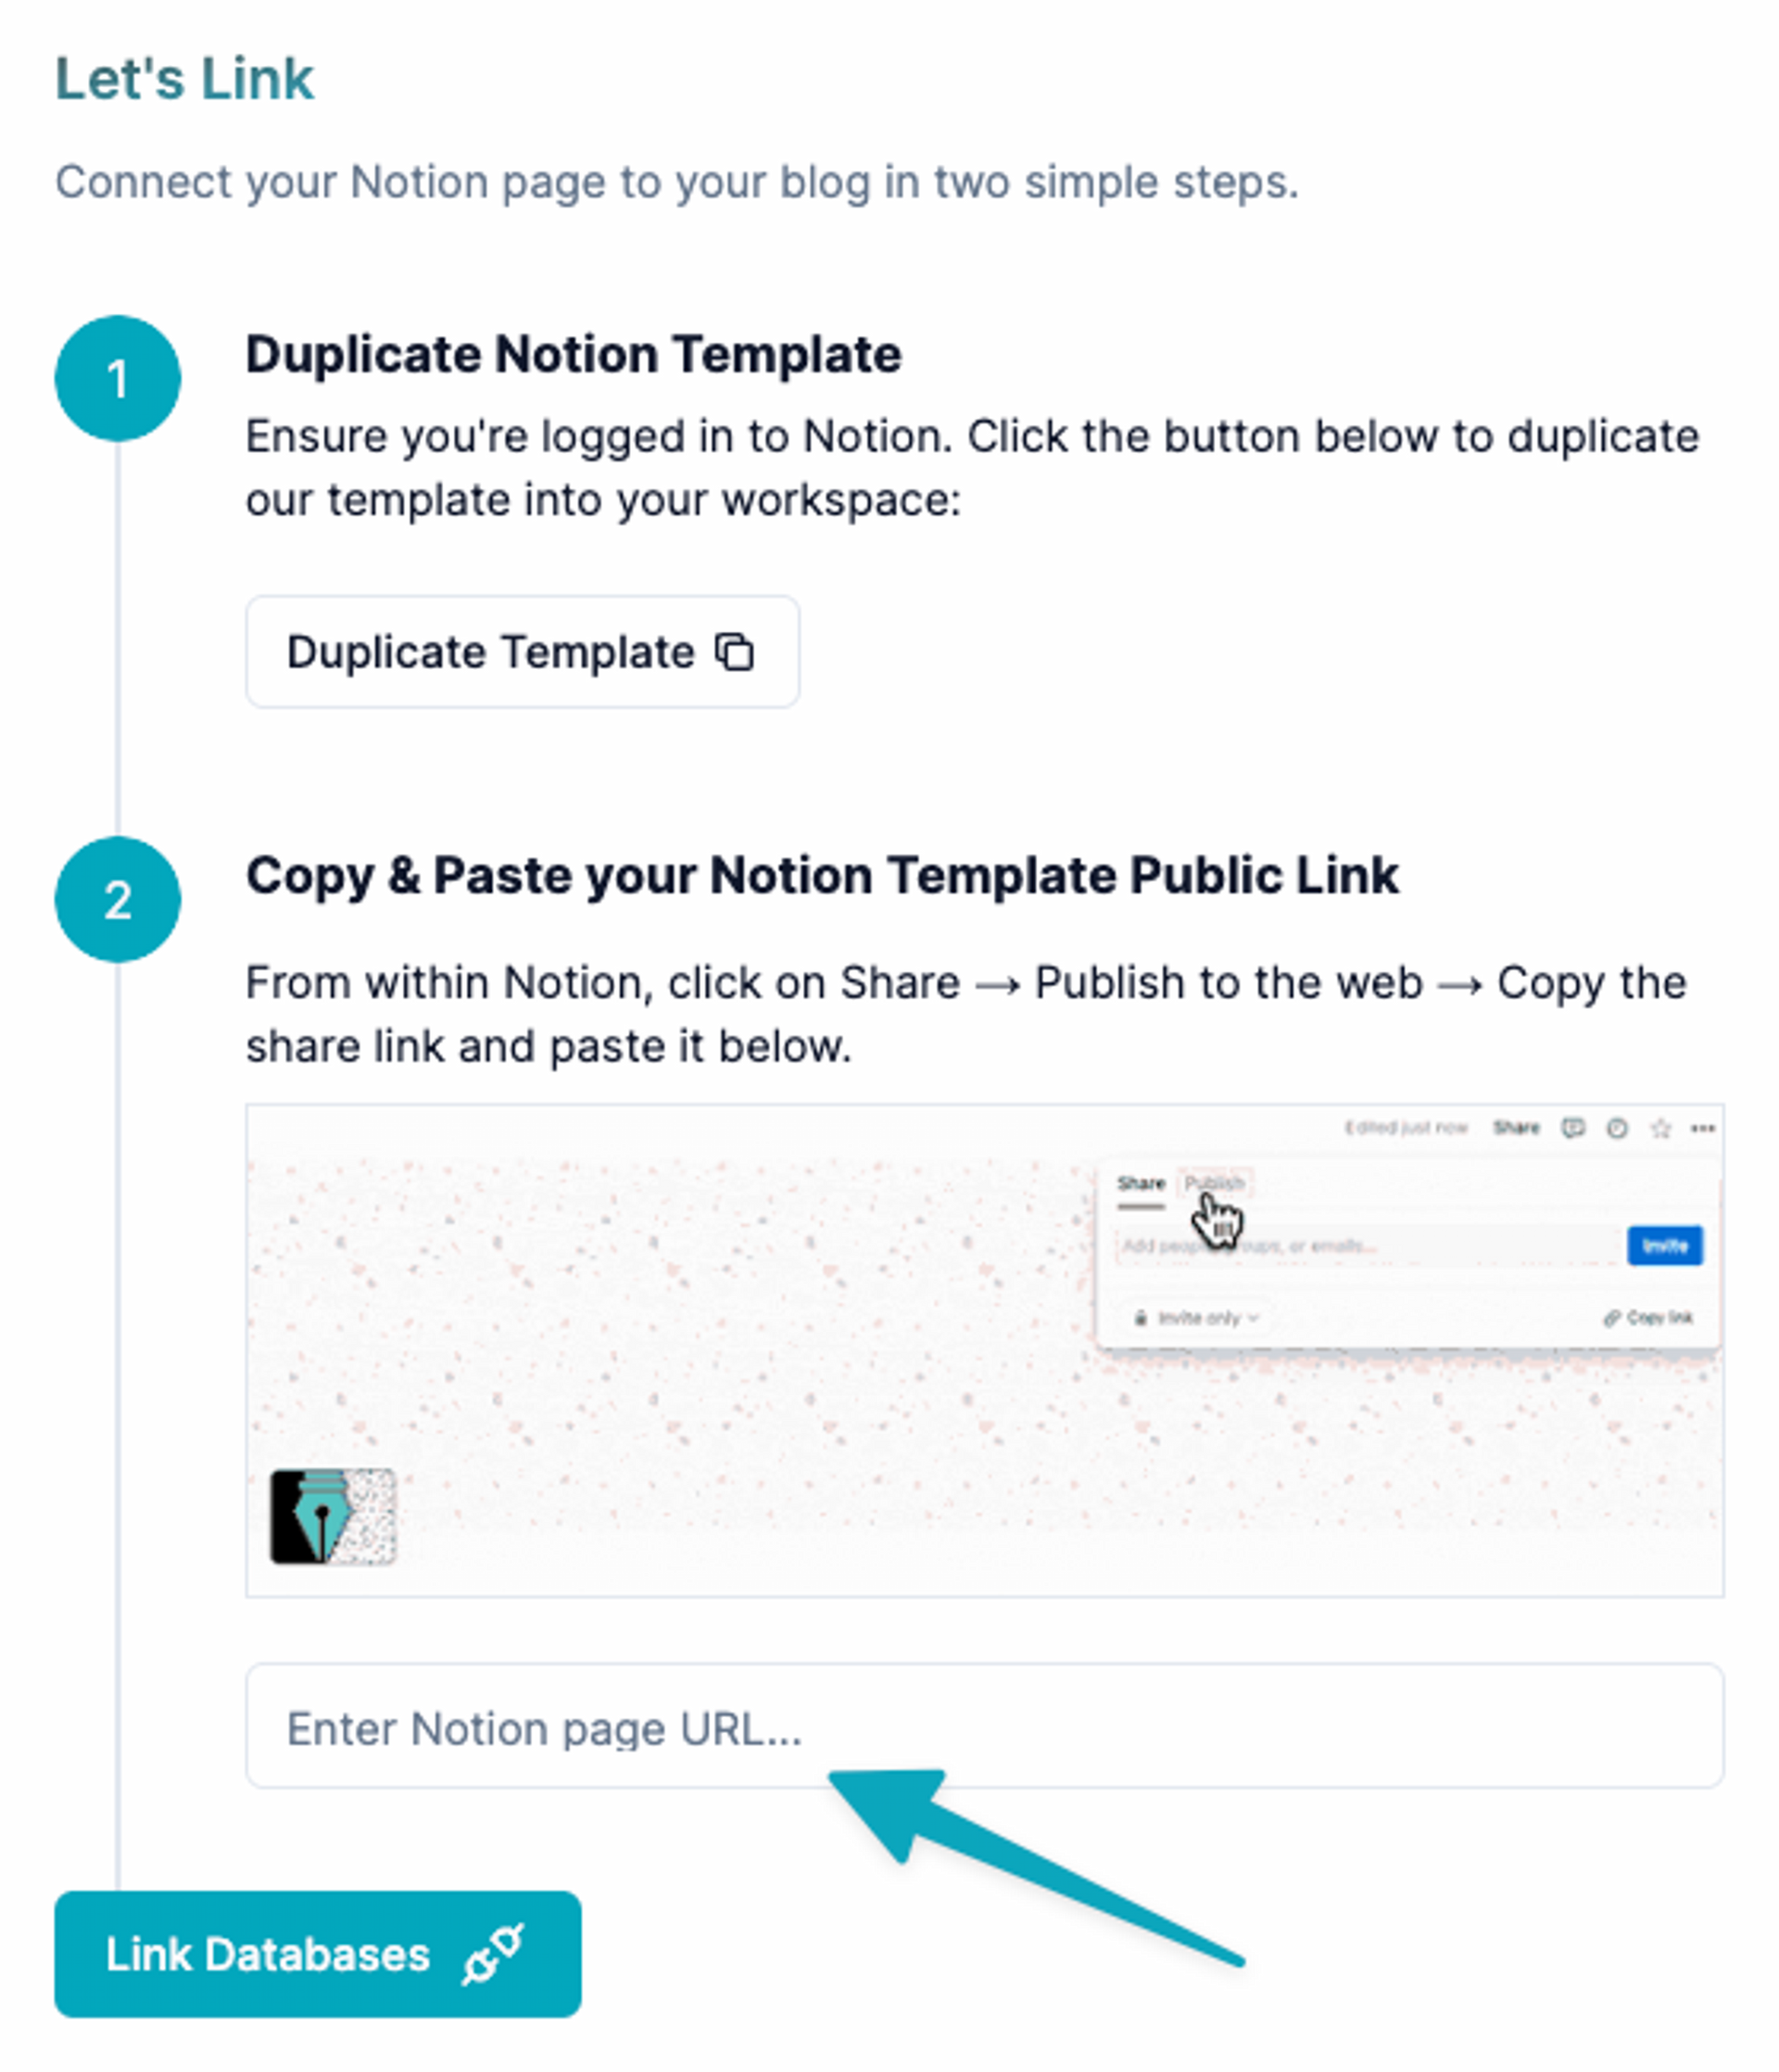 Paste your Notion duplicated template link in the field shown above.